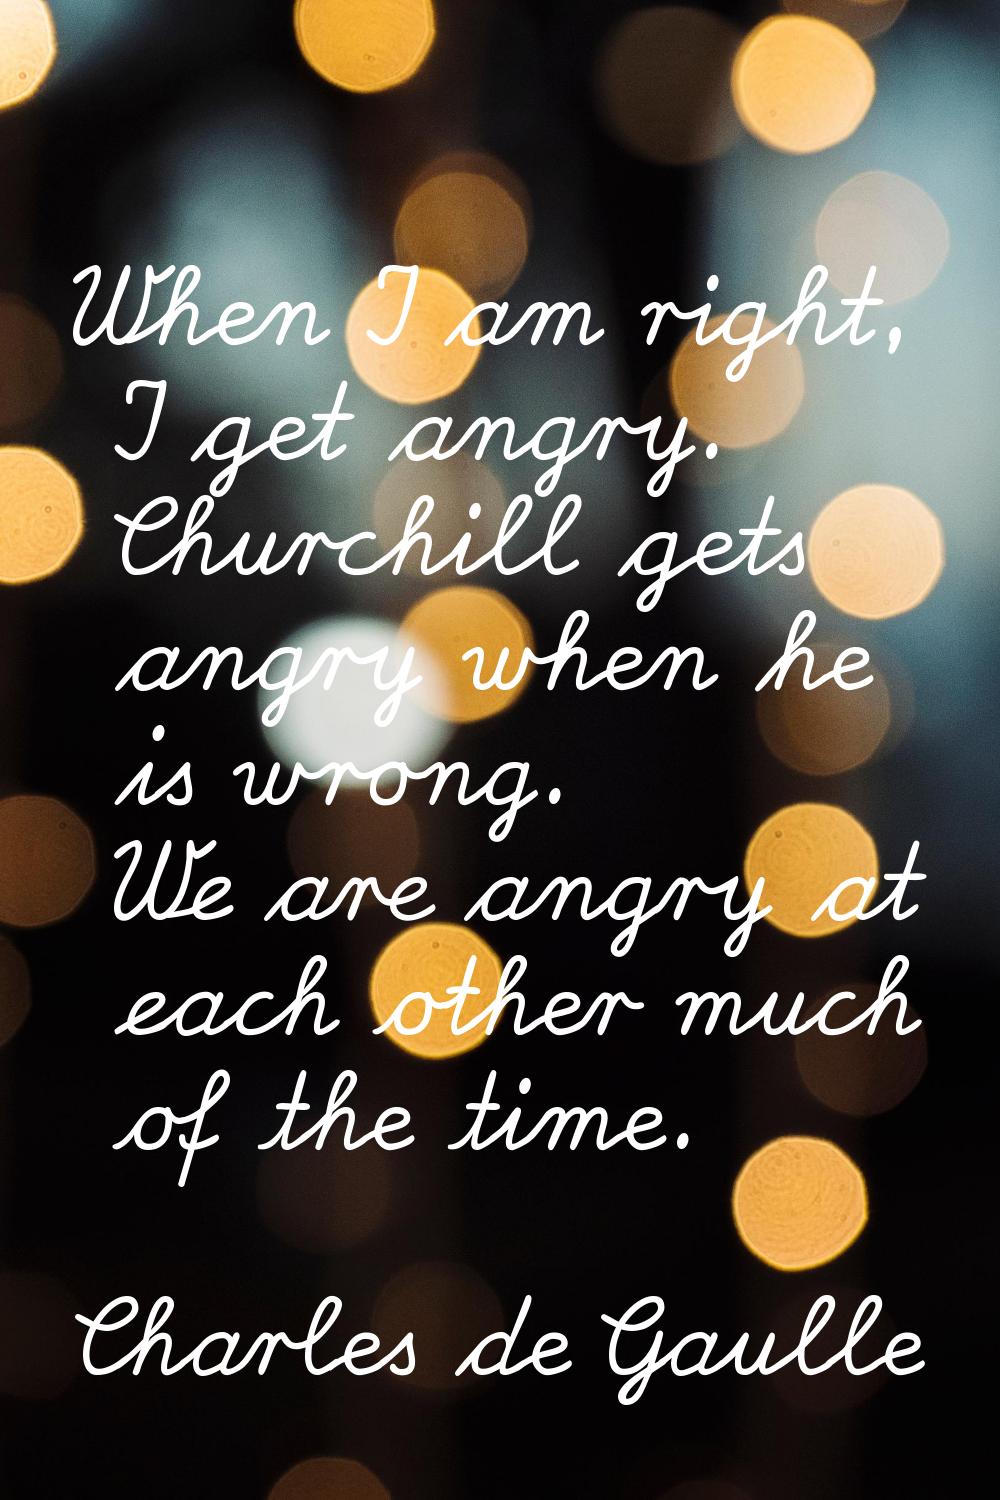 When I am right, I get angry. Churchill gets angry when he is wrong. We are angry at each other muc